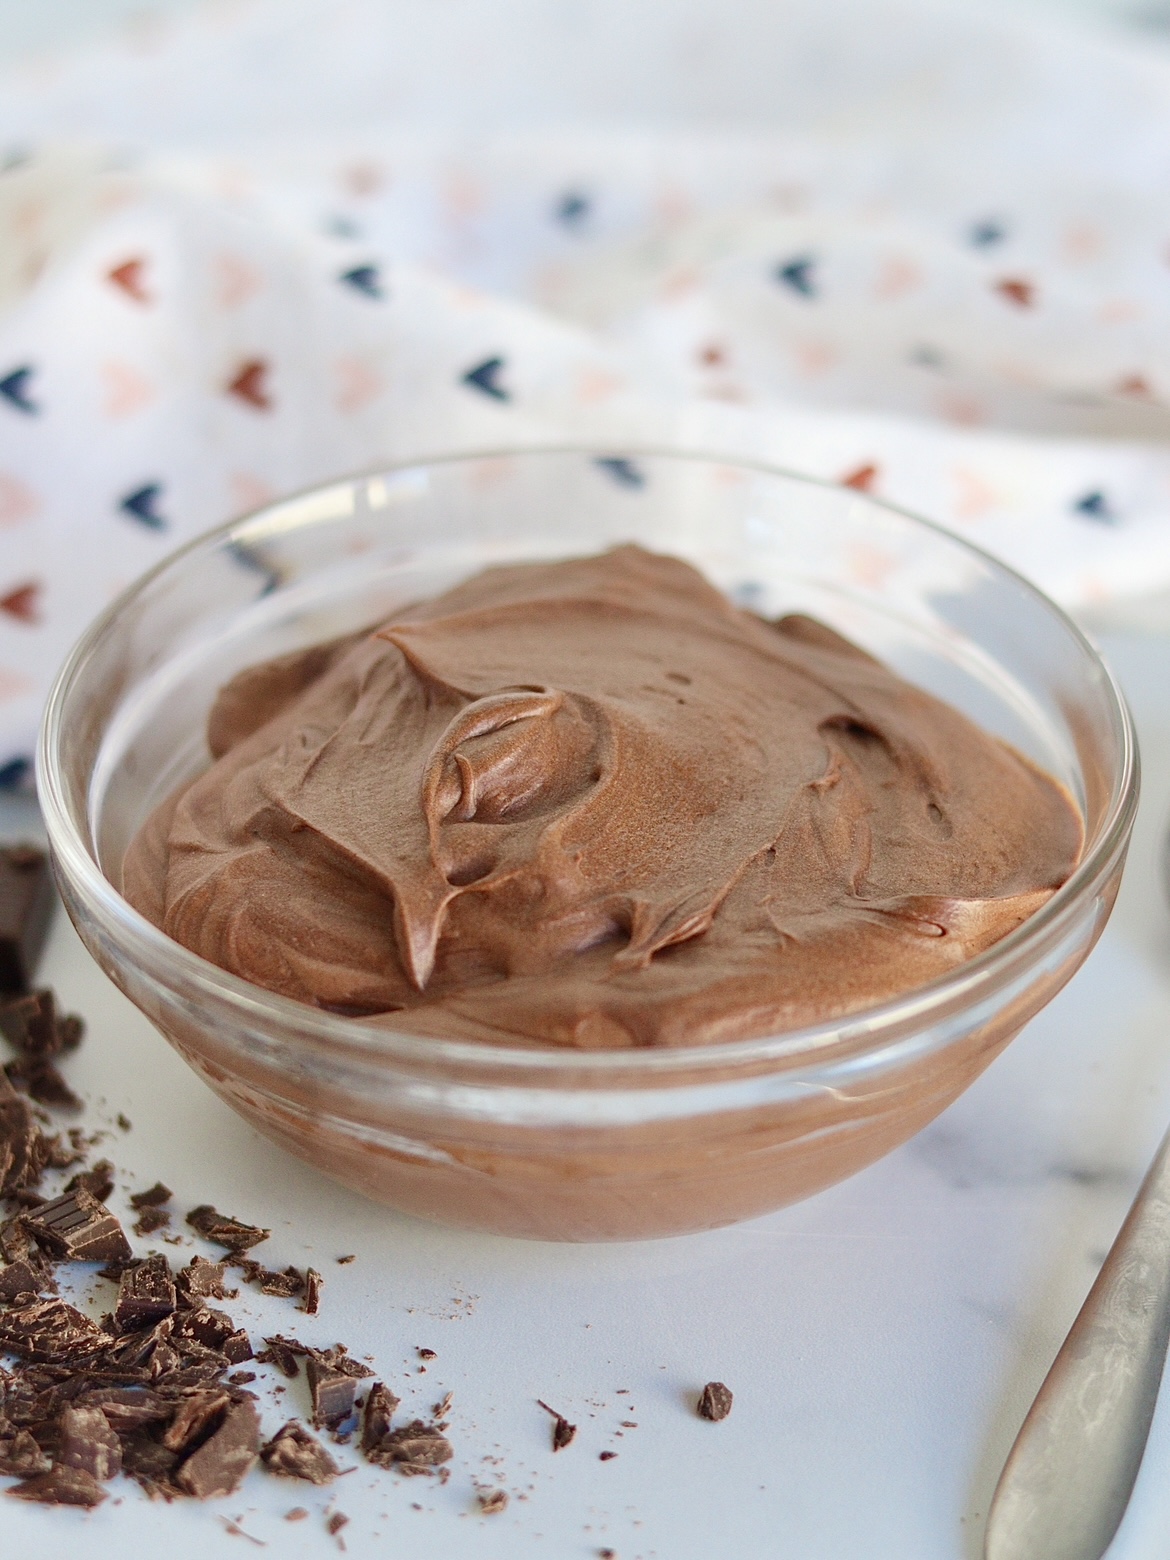 A bowl of two ingredient chocolate mousse with chocolate shavings and a spoon next to it